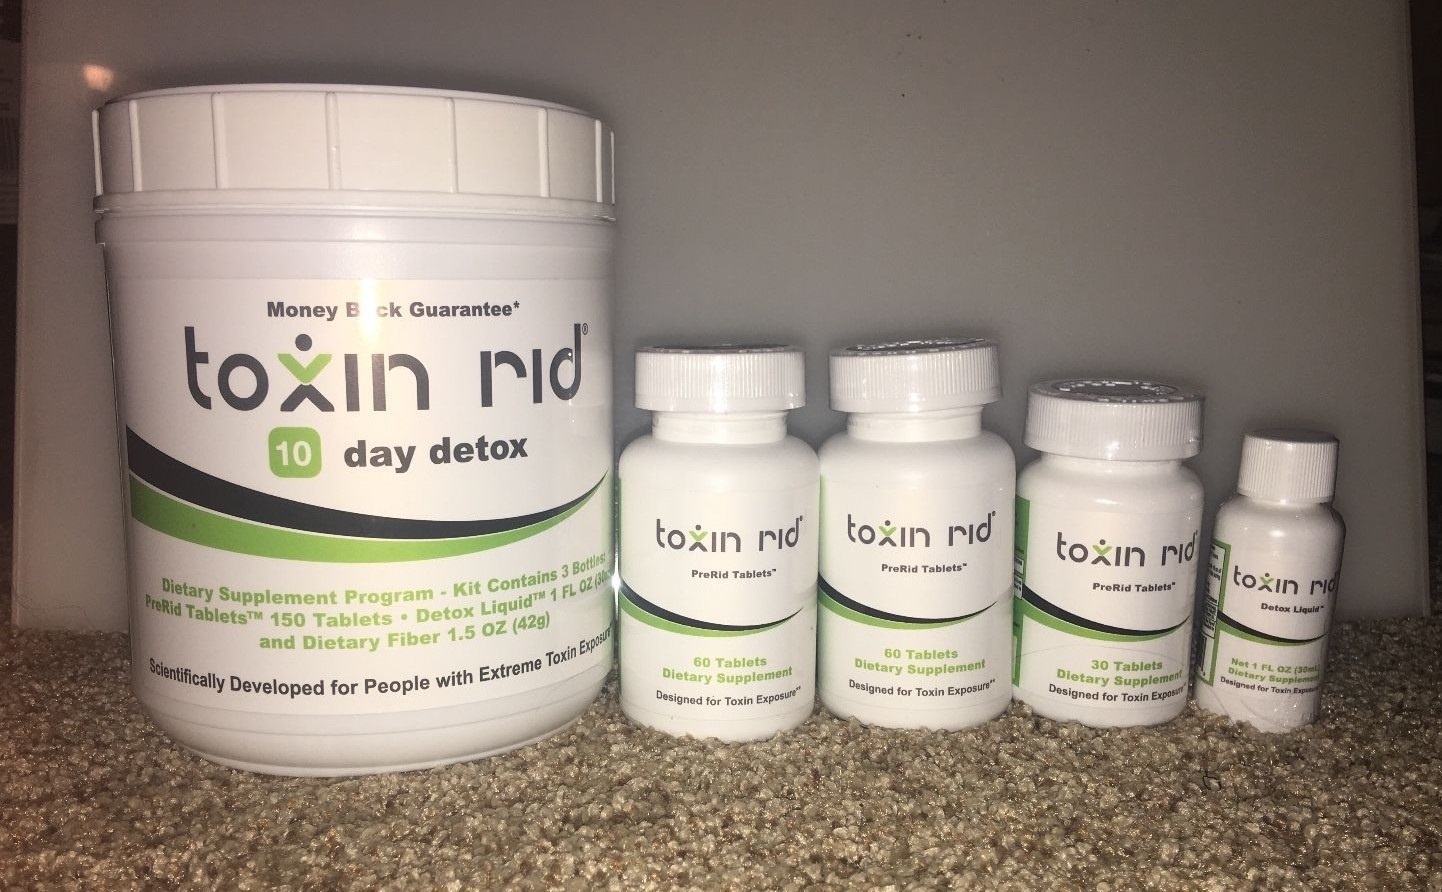 Test Clear Product Review- Toxin Rid 10 Day Detox- Pass Drug Test - Year Te...